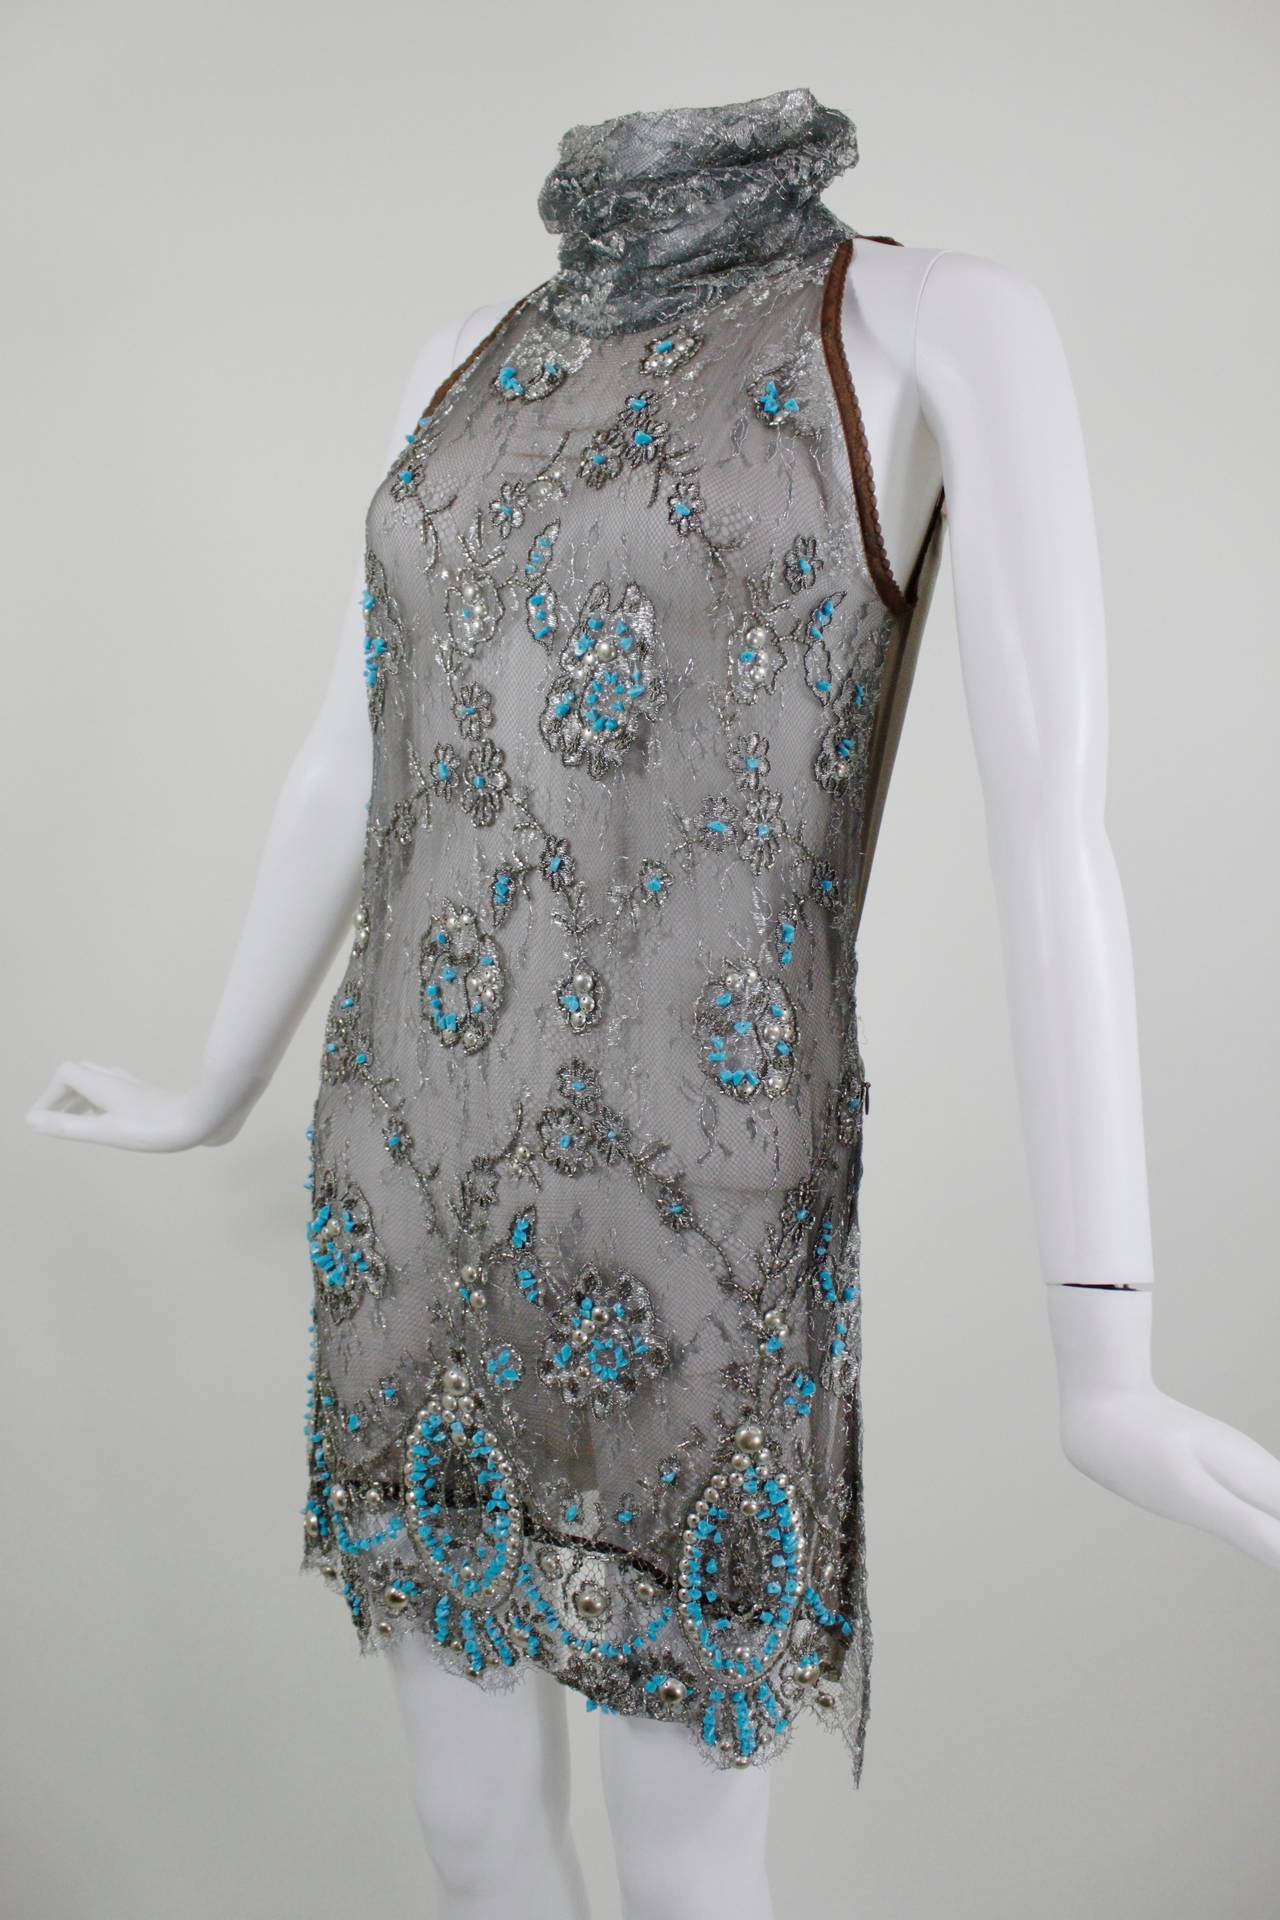 Gianfranco Ferre Metallic Taupe Lace and Turquoise Beaded Tabard For Sale 2